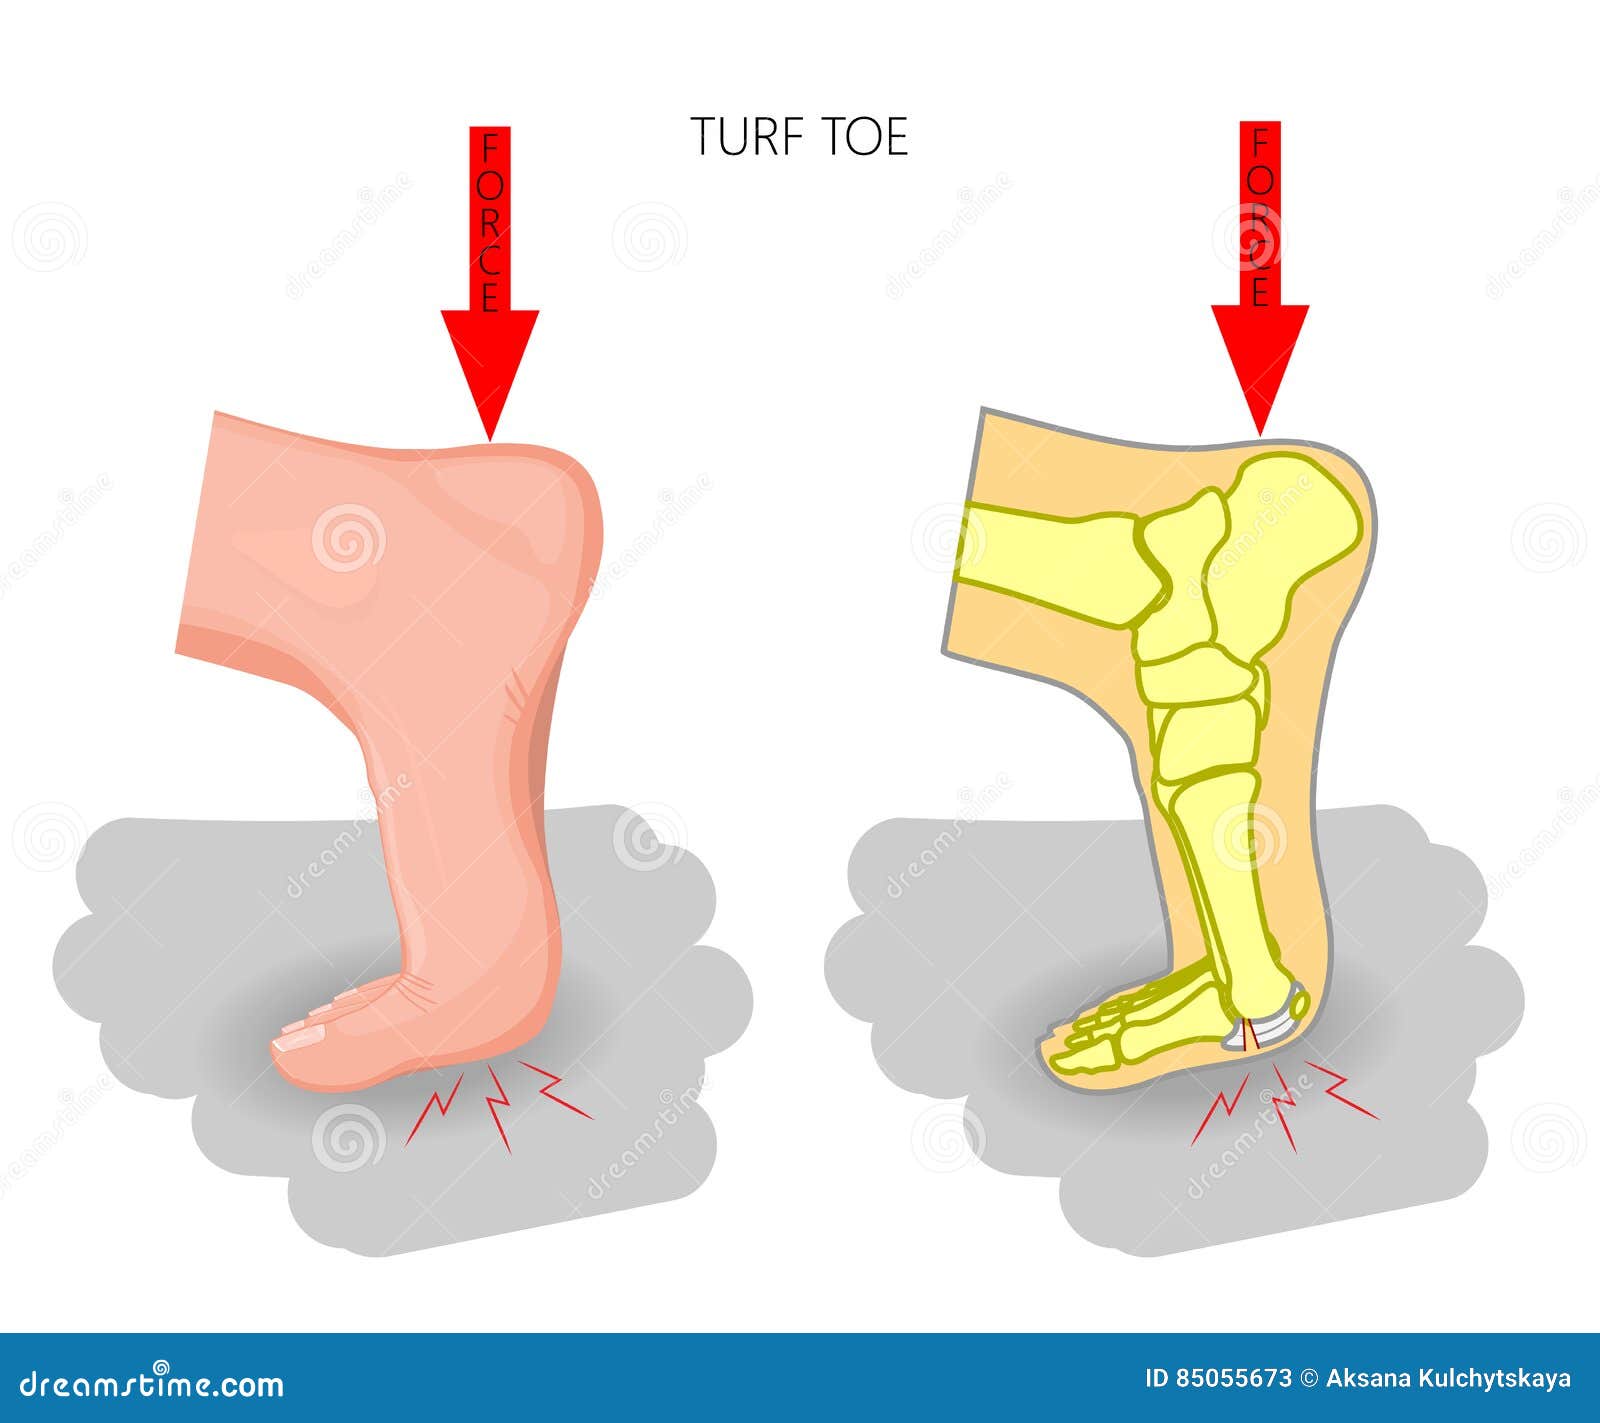 turf toe. rupture of the plantar plate of the first toe of the f